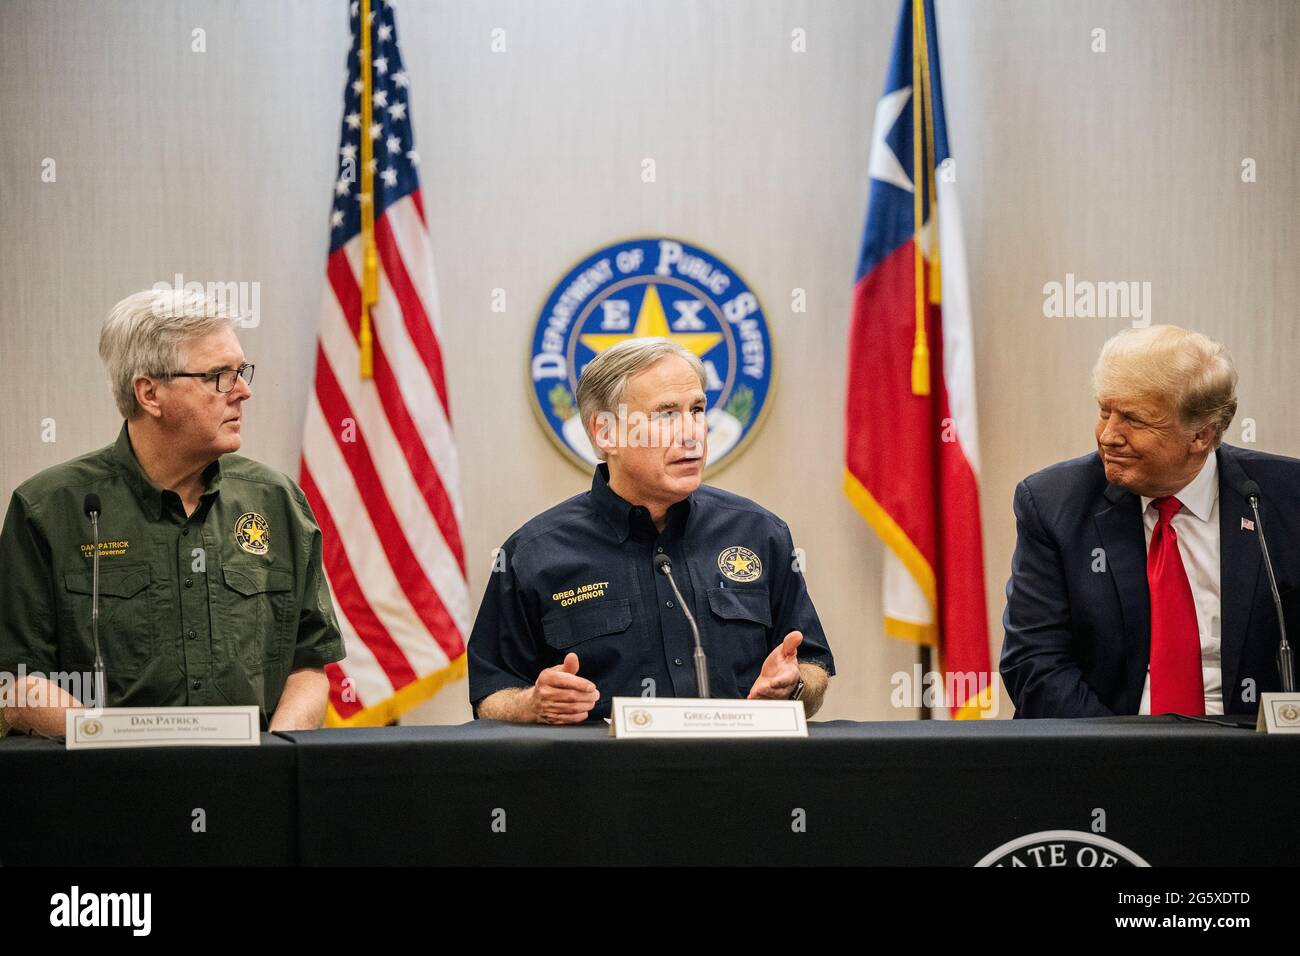 Weslaco Texas USA, June 30: (L-R) Texas Lieutenant Gov. DAN PATRICK, Gov. GREG ABBOTT, and former President DONALD TRUMP attend a border security briefing to discuss further plans in securing the southern border wall. Gov. Abbott has pledged to build a state-funded border wall between Texas and Mexico as a surge of mostly Central American immigrants crossing into the United States has challenged U.S. immigration agencies. (Pool Photo/ Brandon Bell) Credit: Bob Daemmrich/Alamy Live News Stock Photo